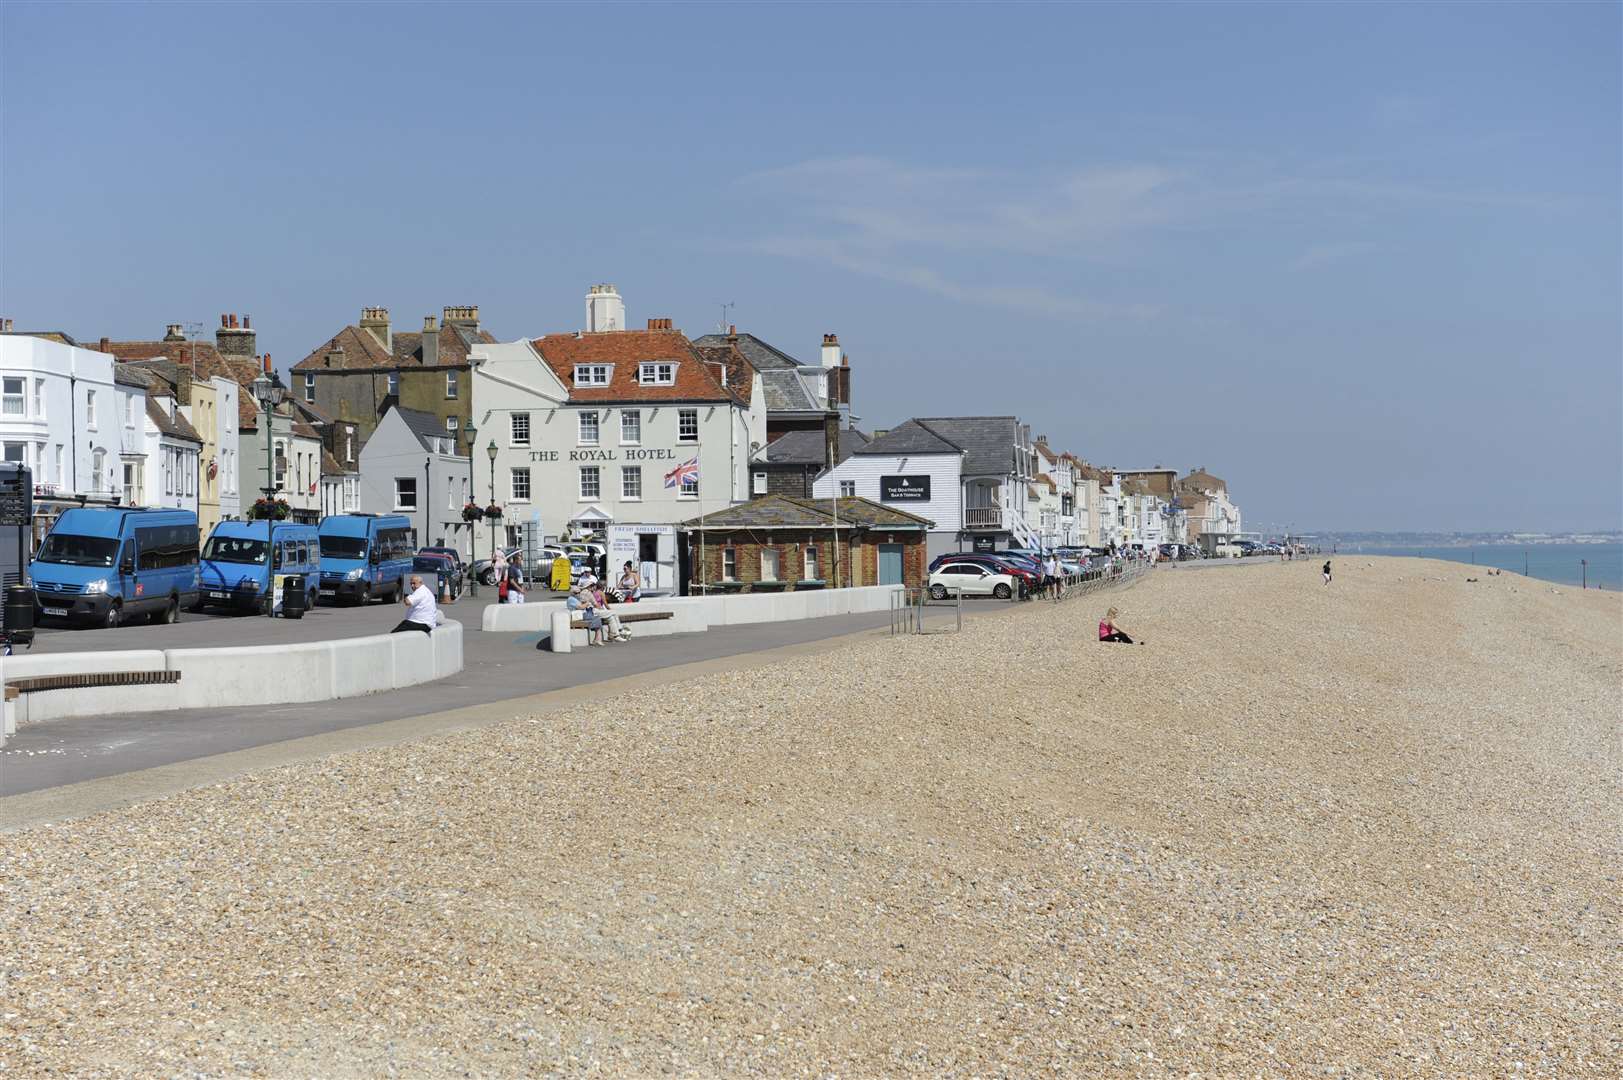 A dispersal order will be in place along Deal's seafront